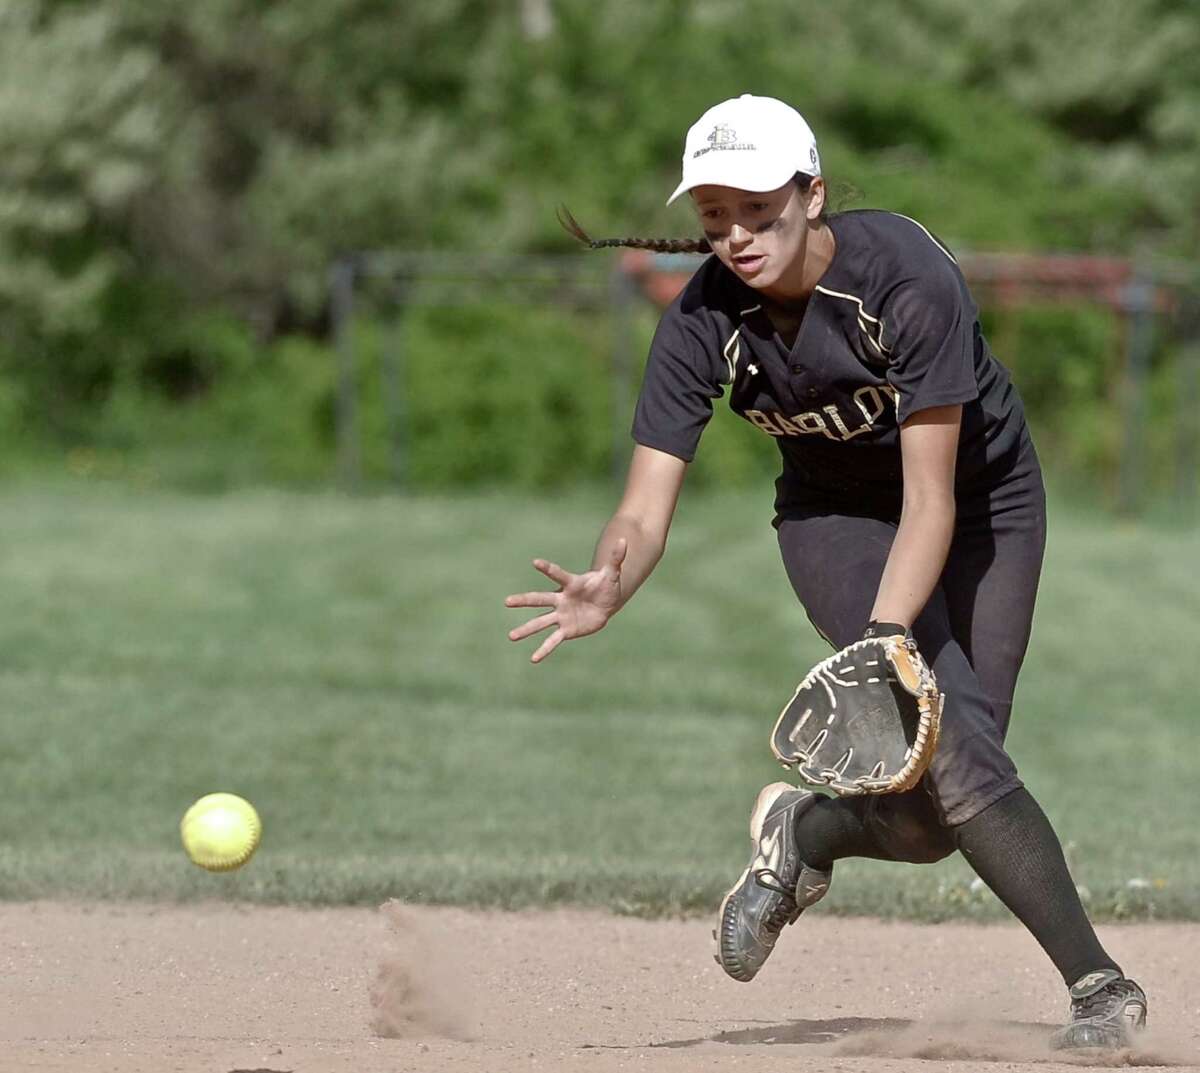 Barlow's Briana Marcelino (8) fields a ground ball during the girls high school softball game between Joel Barlow and Pomperaug high schools on Wednesday, May 13, 2015, played at Pomperaug High School, in Southbury, Conn.